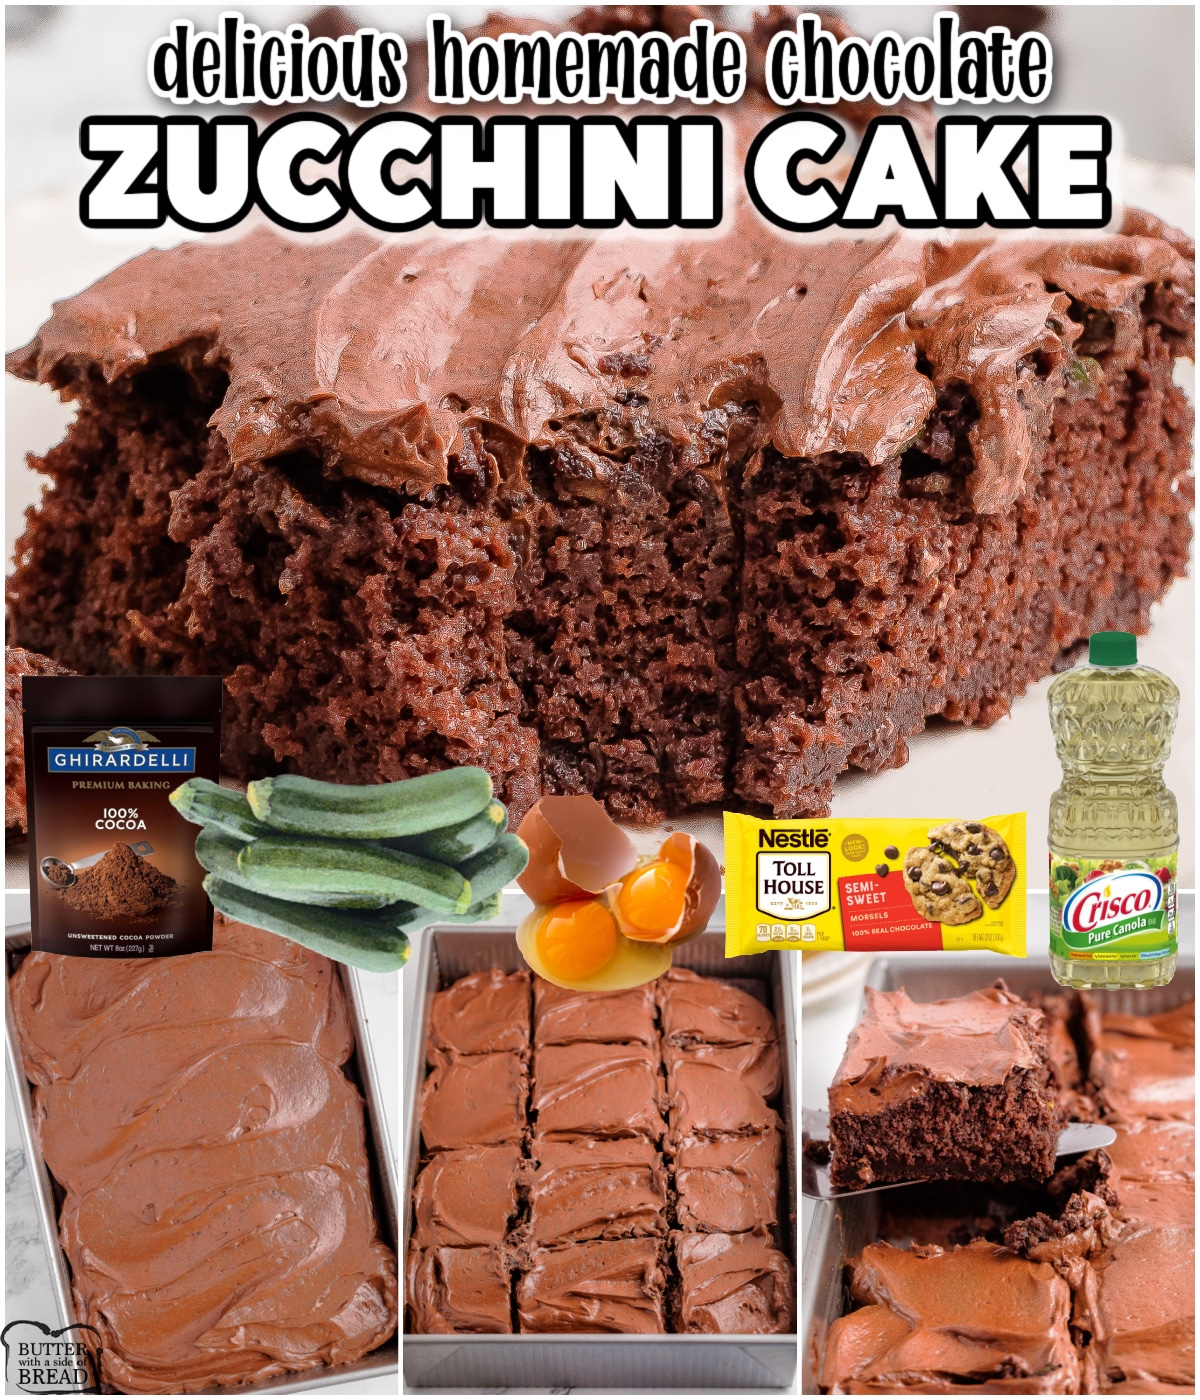 Chocolate Zucchini Cake is a moist, light cake that's topped with a smooth whipped chocolate ganache! The cake batter has grated zucchini which gives the cake a great texture, along with chocolate chips for extra chocolate!